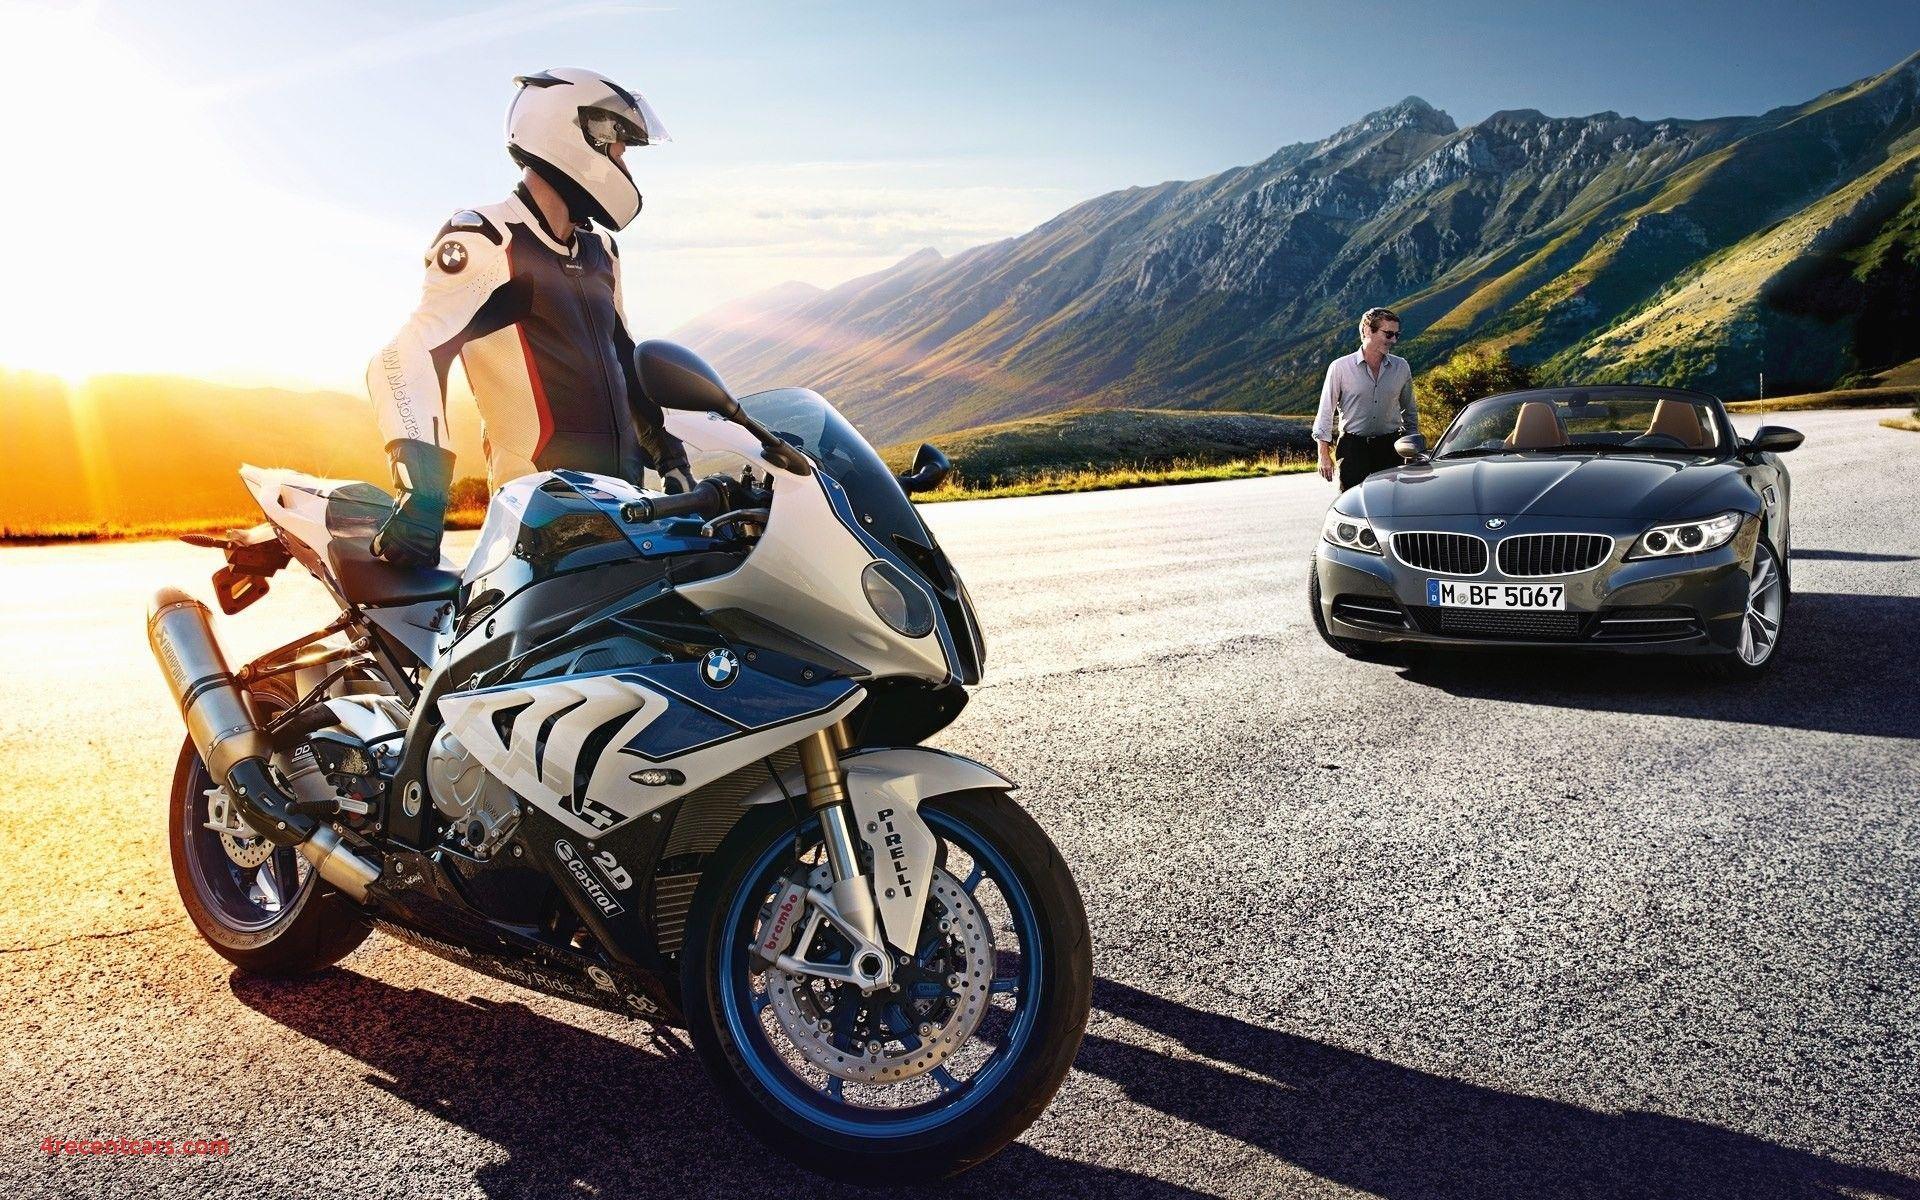 BMW Motorcycle Wallpaper Free BMW Motorcycle Background